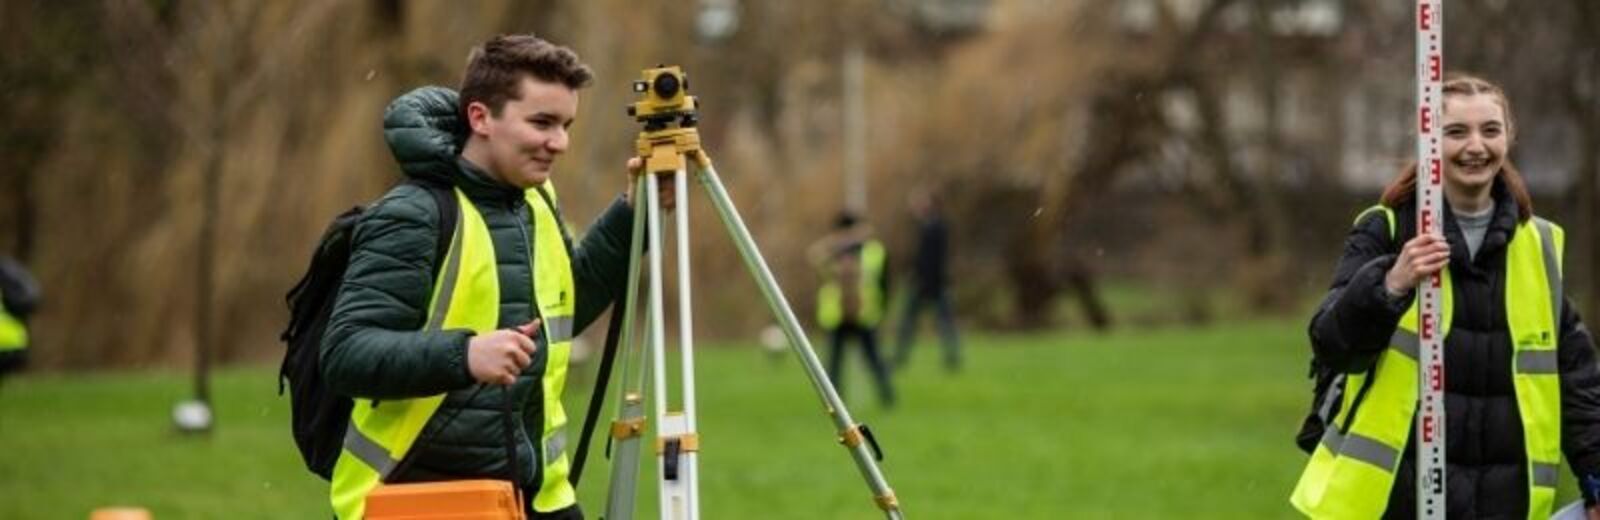 Architectural Engineering students surveying in St Georges field.